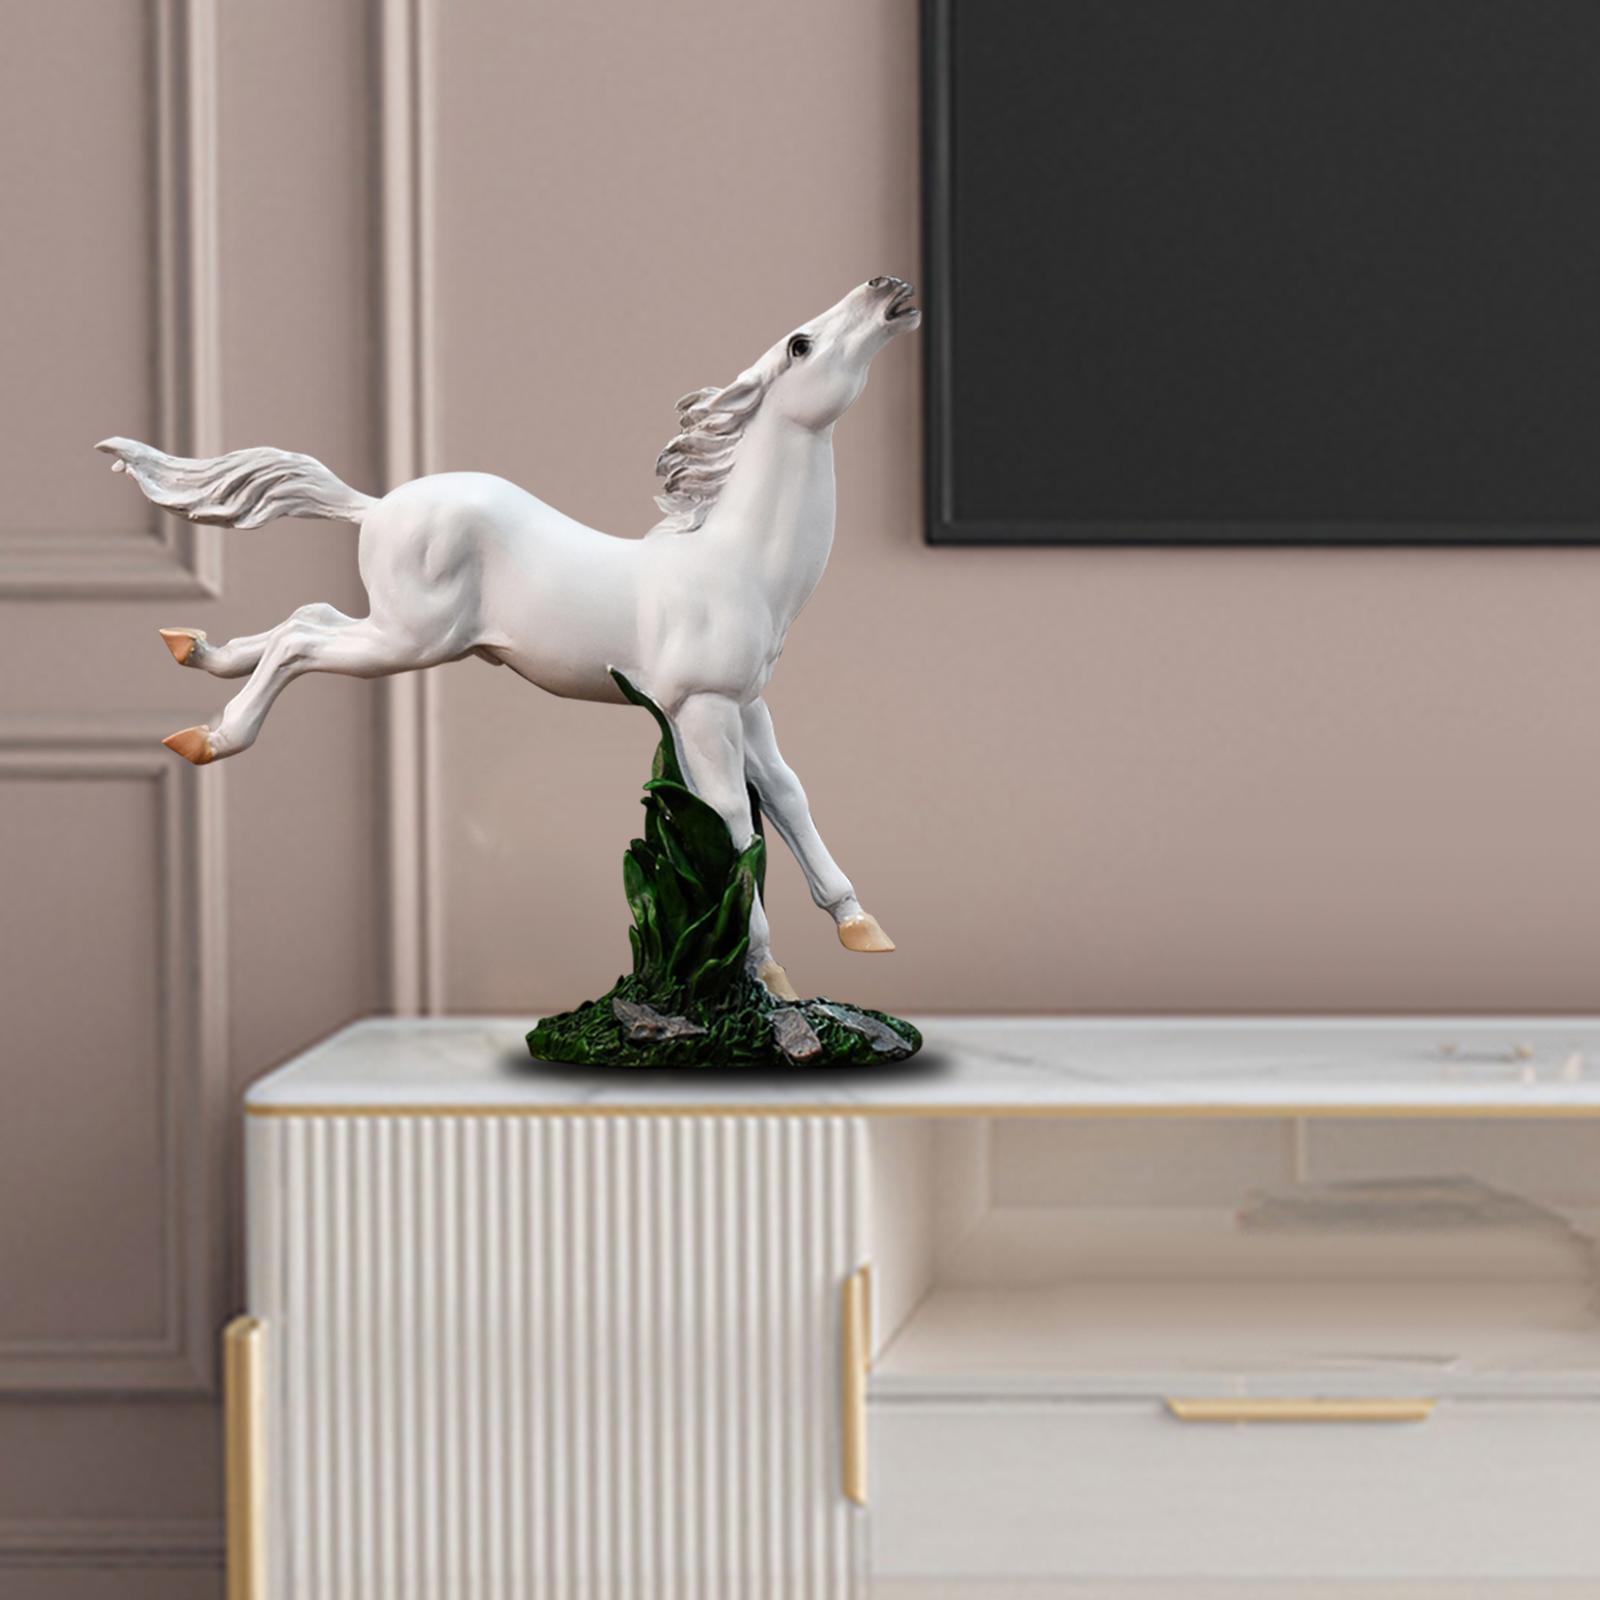 Abstract Horse Statues Animal Sculptures Figurines for Office Wedding Decors